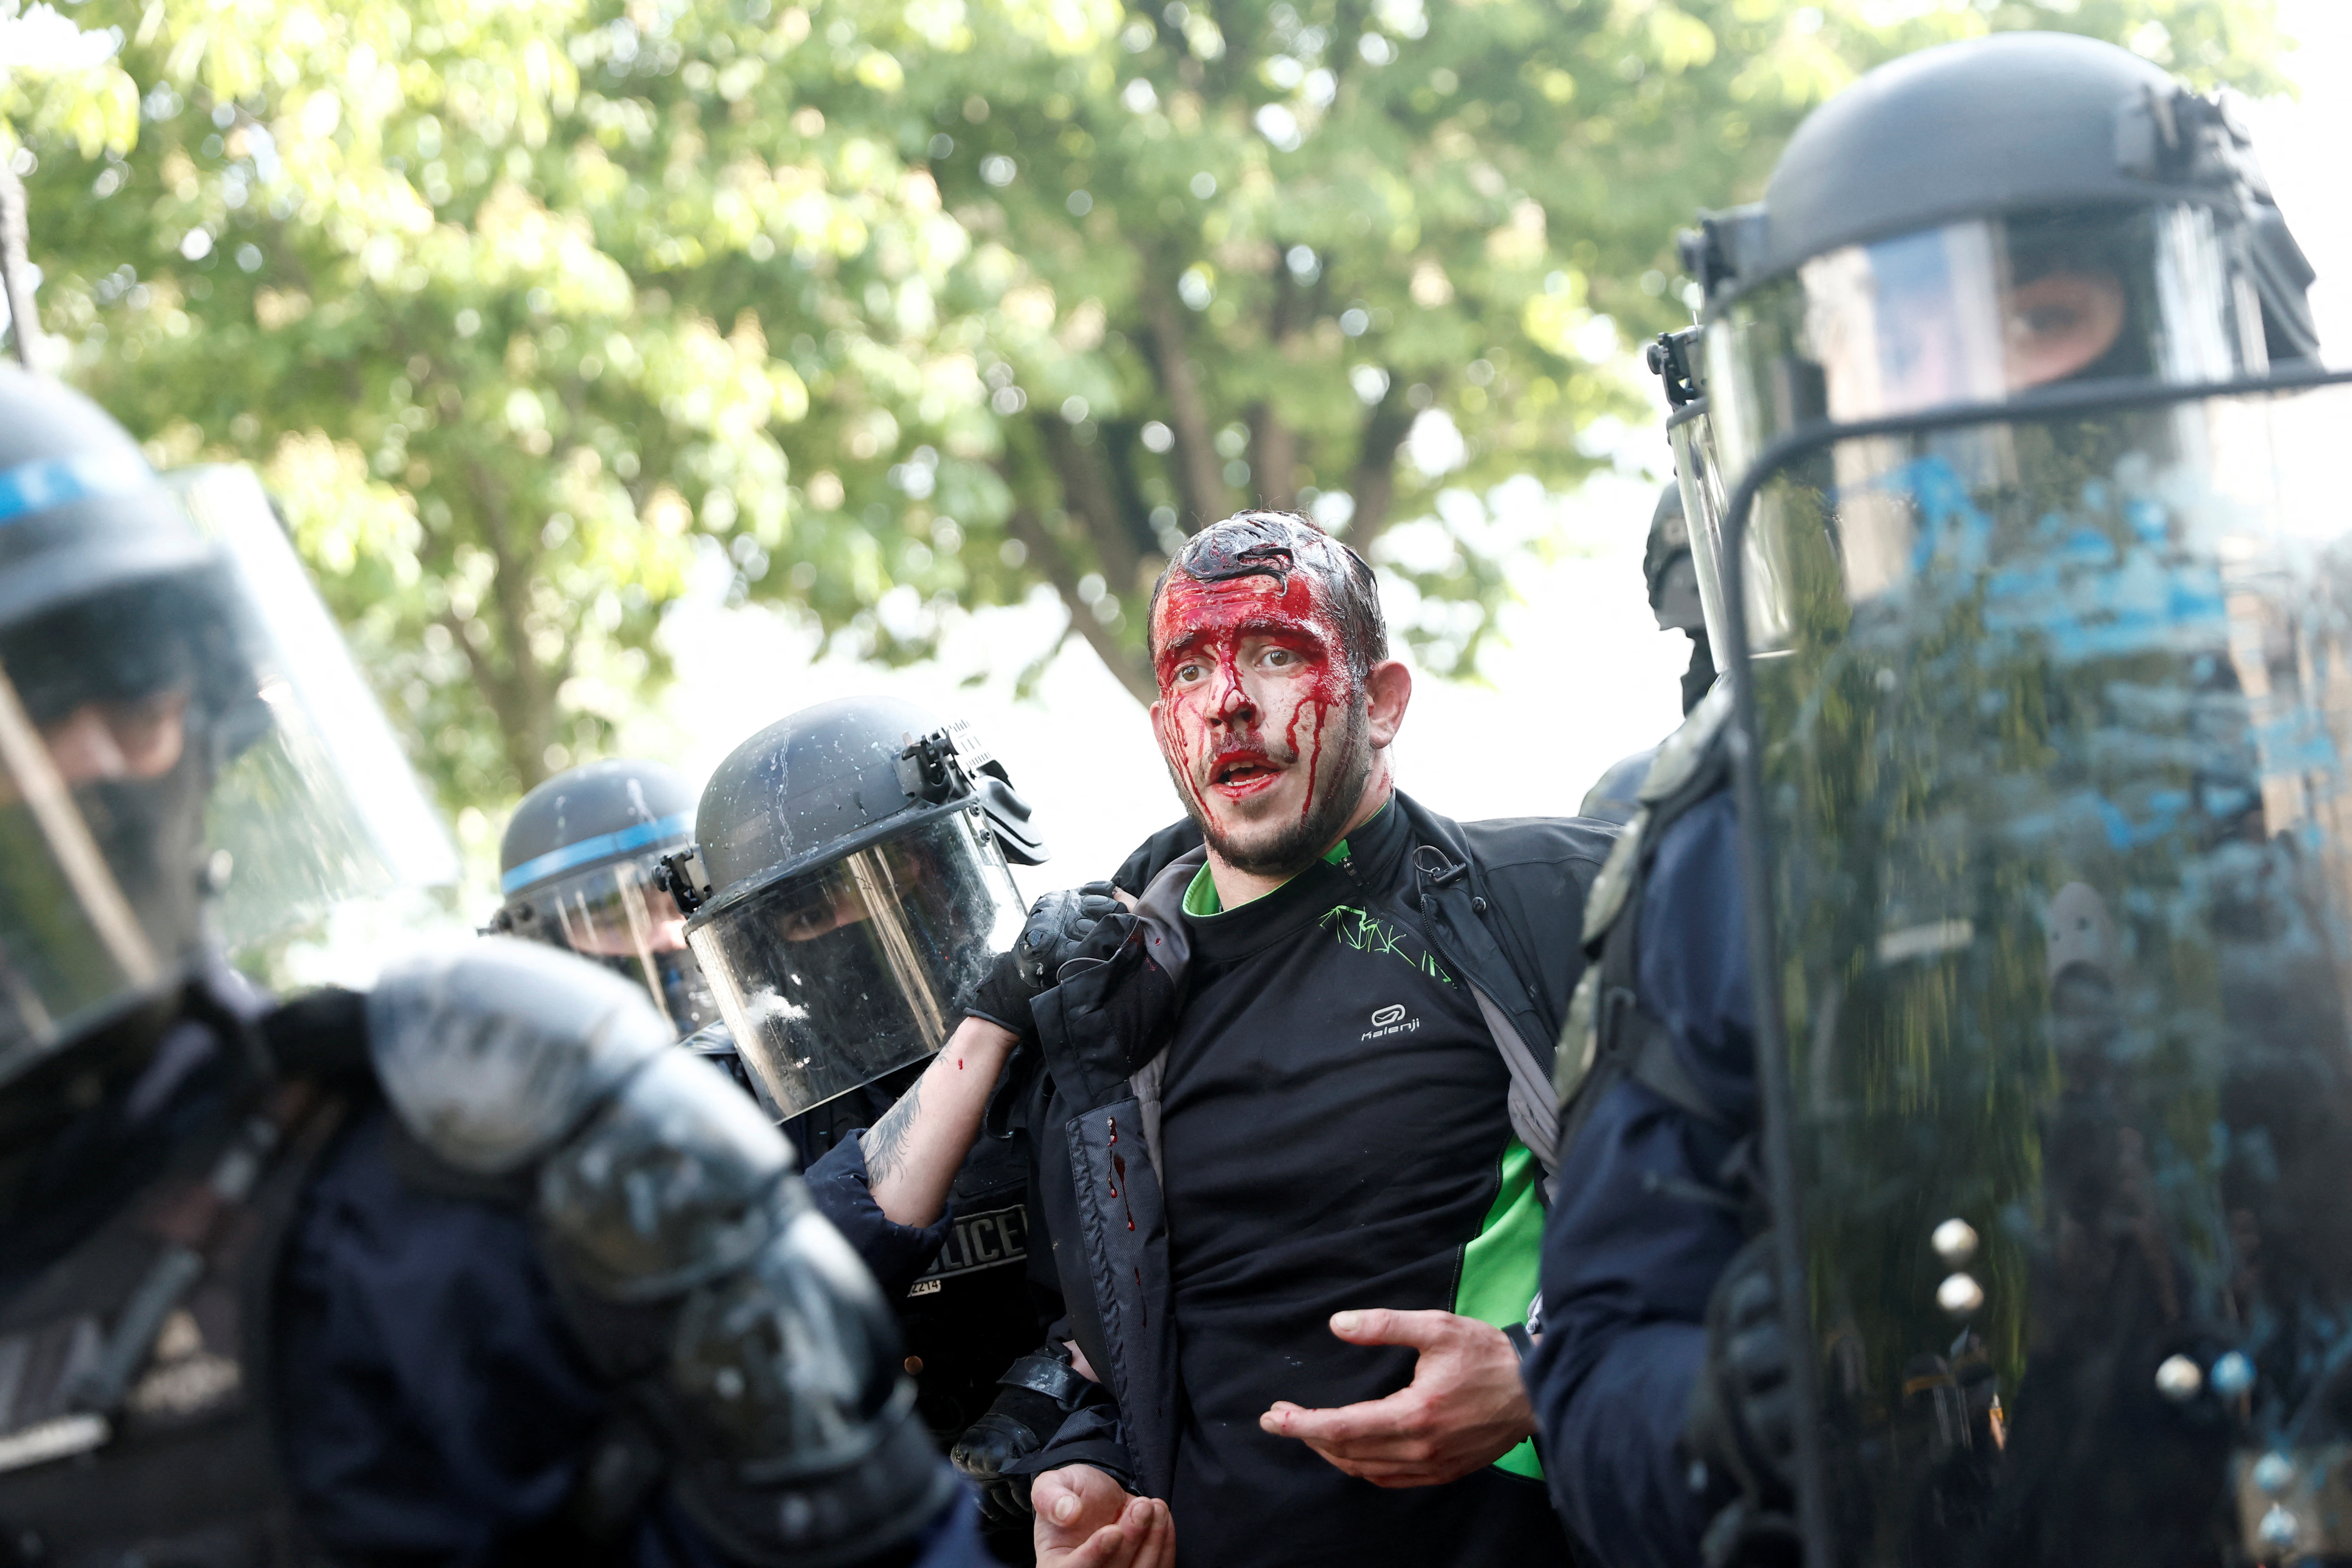 SENSITIVE MATERIAL. THIS IMAGE MAY OFFEND OR DISTURB    French riot police officers walk with a wounded man during the traditional May Day labour march, a day of mobilisation against the French pension reform law and for social justice, in Paris, France May 1, 2023. REUTERS/Benoit Tessier